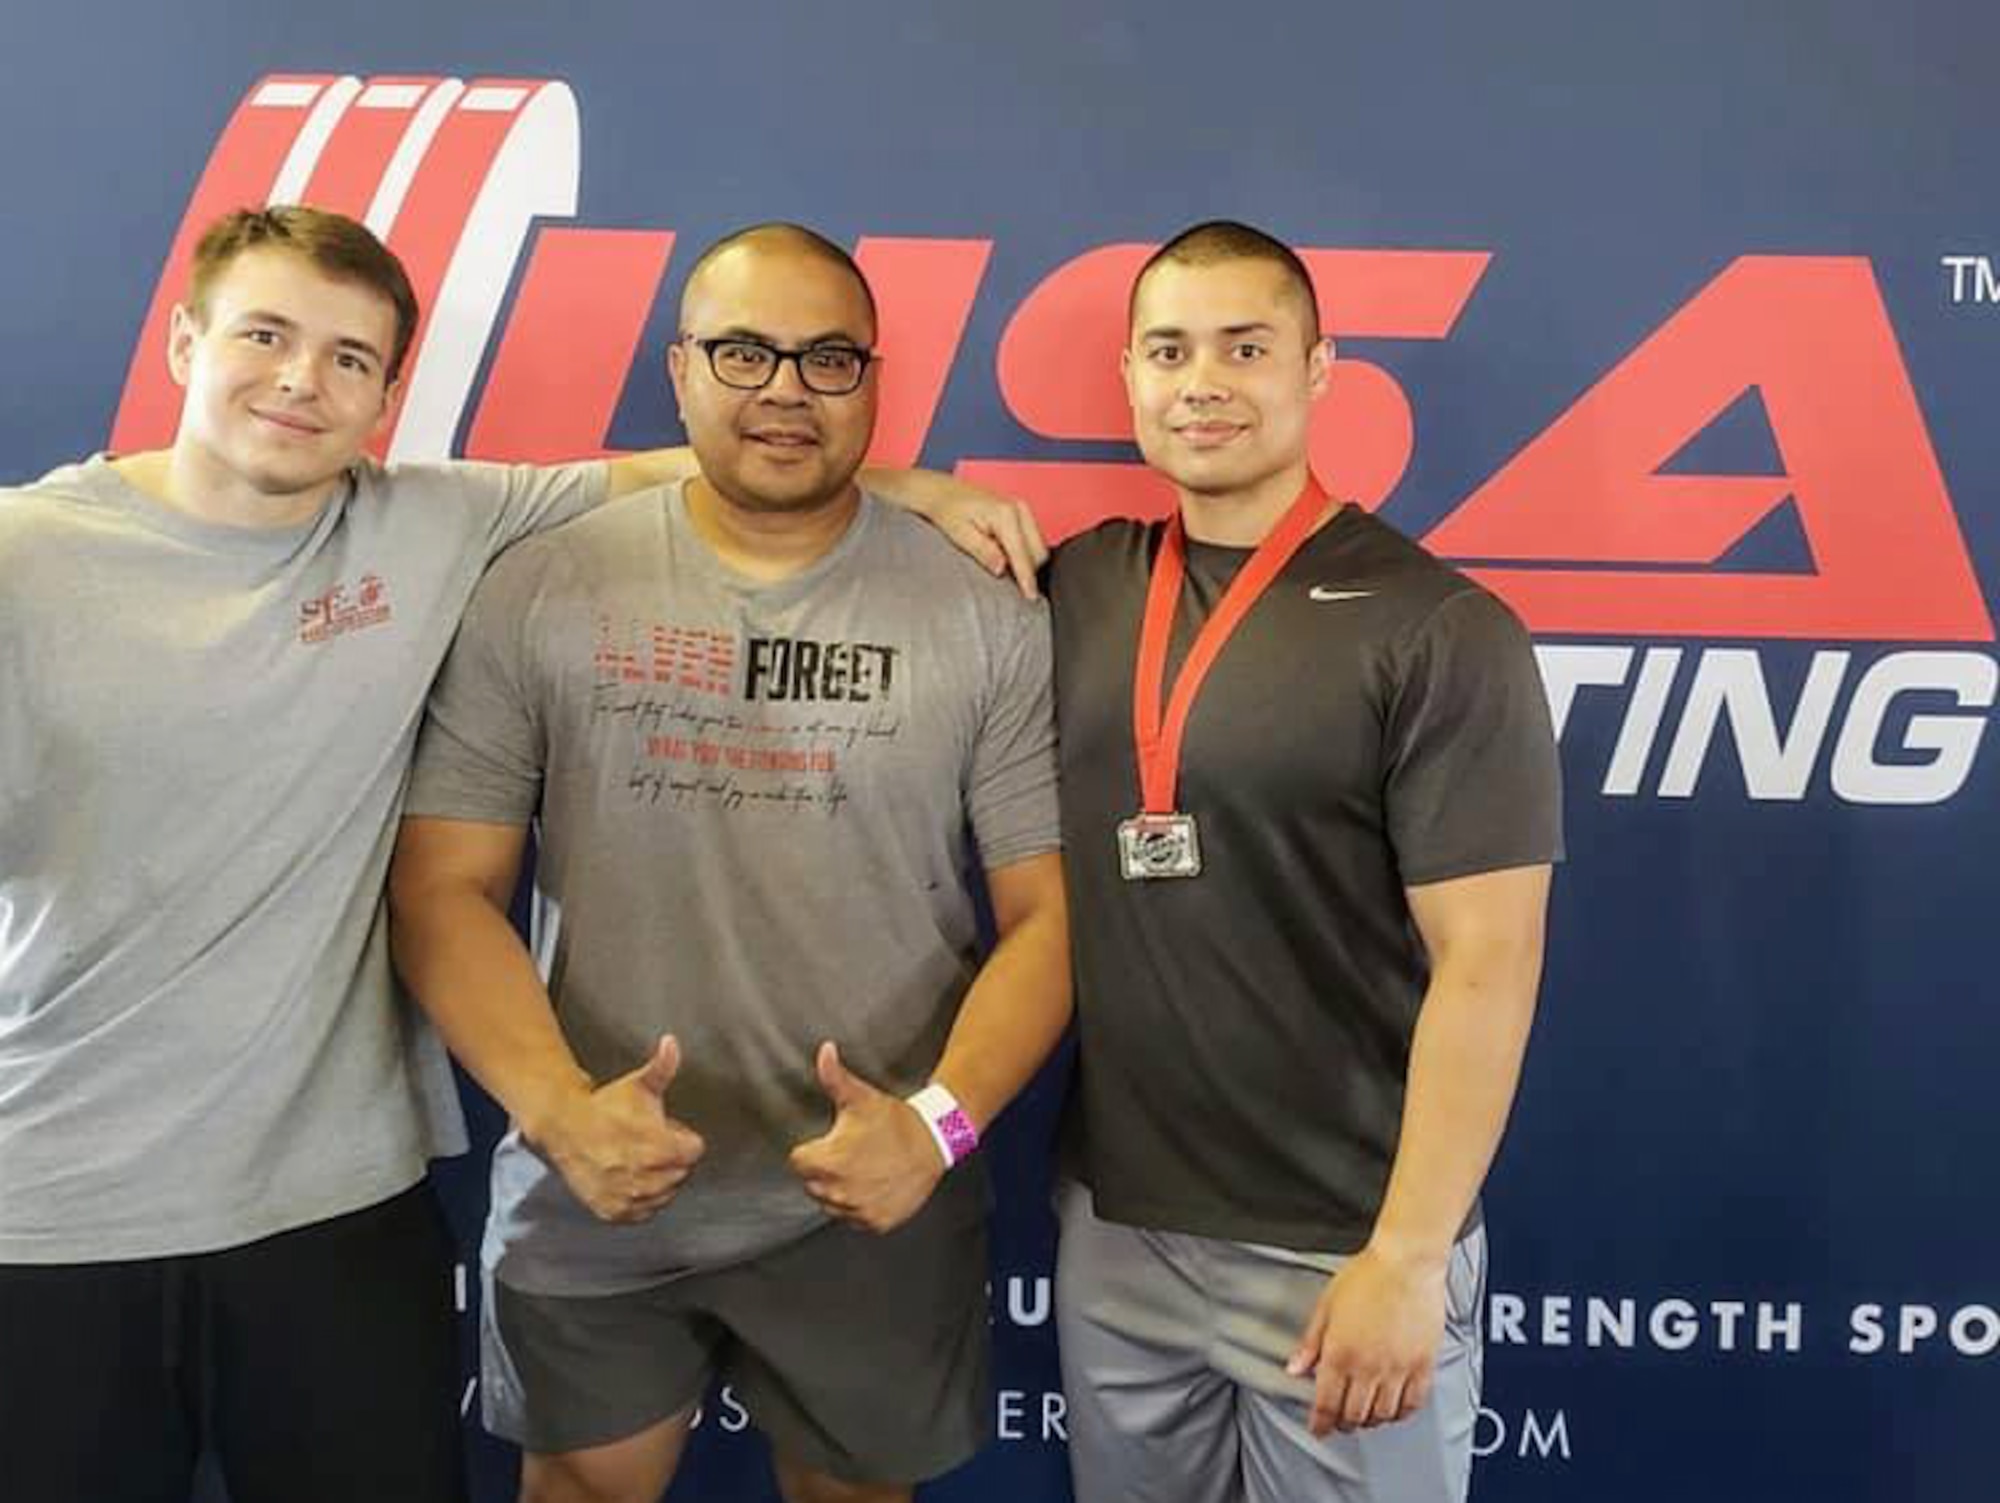 Senior Airman Zachary Nelson, left, Tech. Sgt. Nick Soriano, middle, and Staff Sgt. Christopher LaCour, right, pose for a photo during the Northwest Regional USA Powerlifting Competition July 29, 2018. Nelson placed second in the 74 kg weight class and LaCour place second in the 93 kg weight class which qualified them for Nationals in Spokane, Washington, Oct. 11-15, 2018.